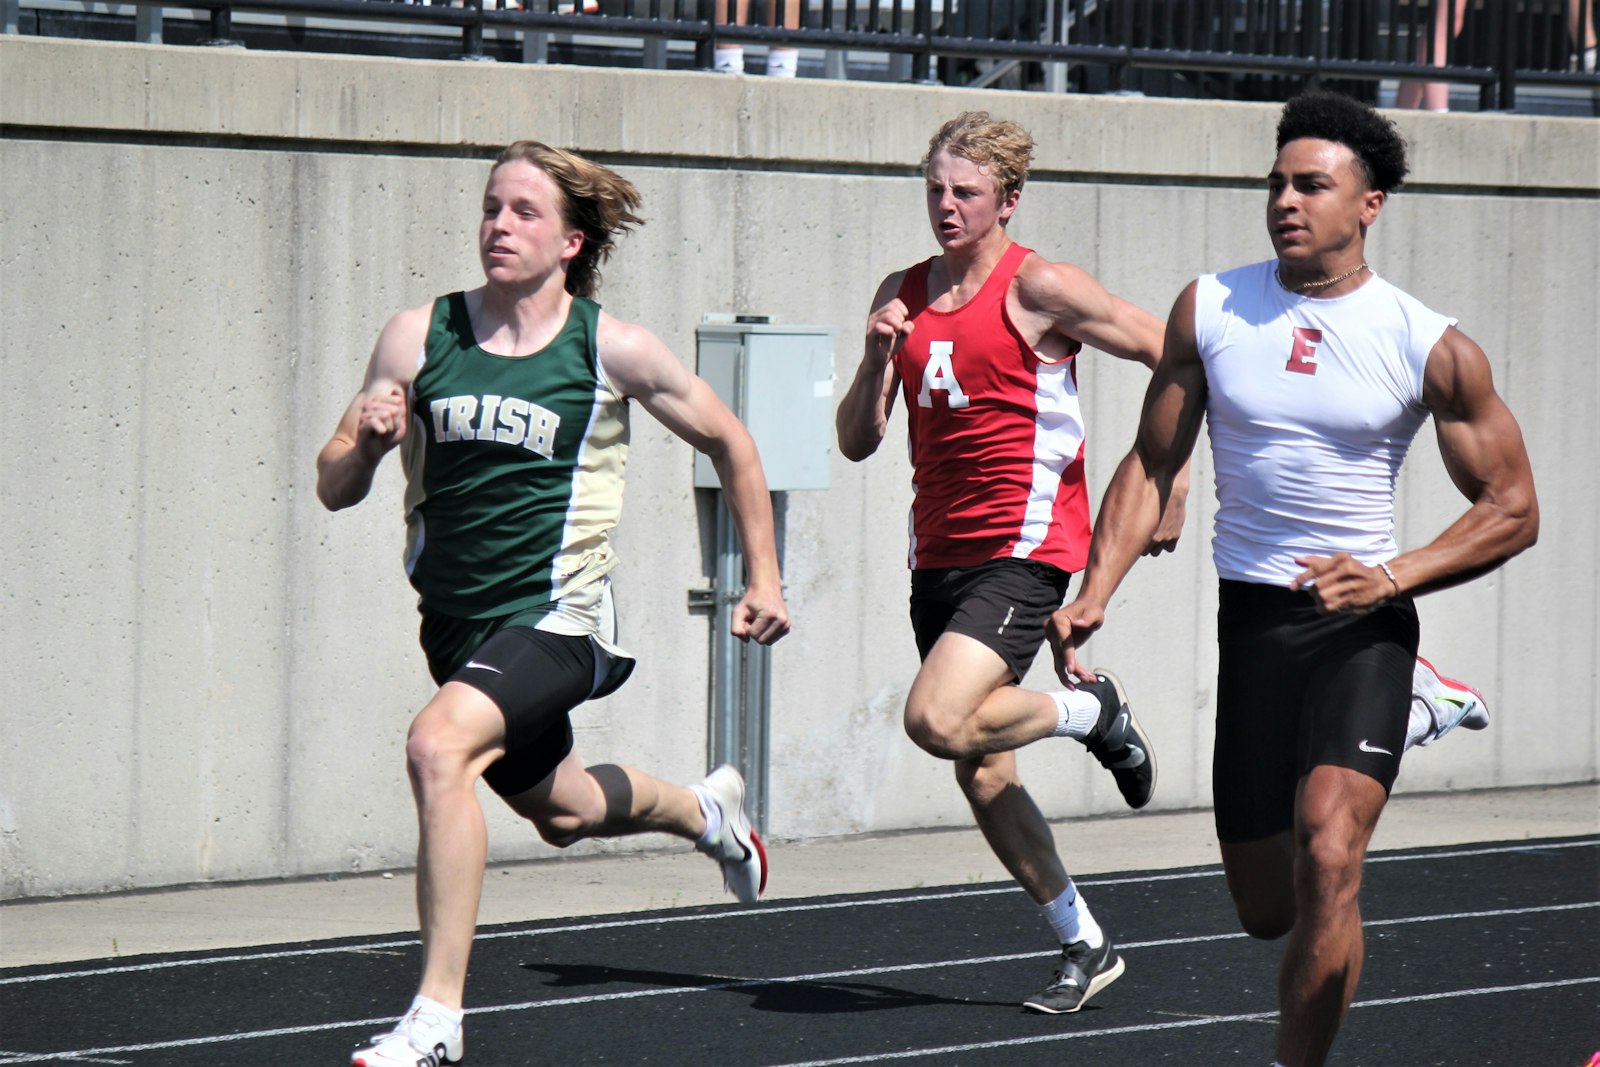 Pontiac Notre Dame Prep senior Zach Mylenek finished first in the 400-meter dash and was runner-up in the 200 at the Division 2 finals. (Wright Wilson | Special to Detroit Catholic)